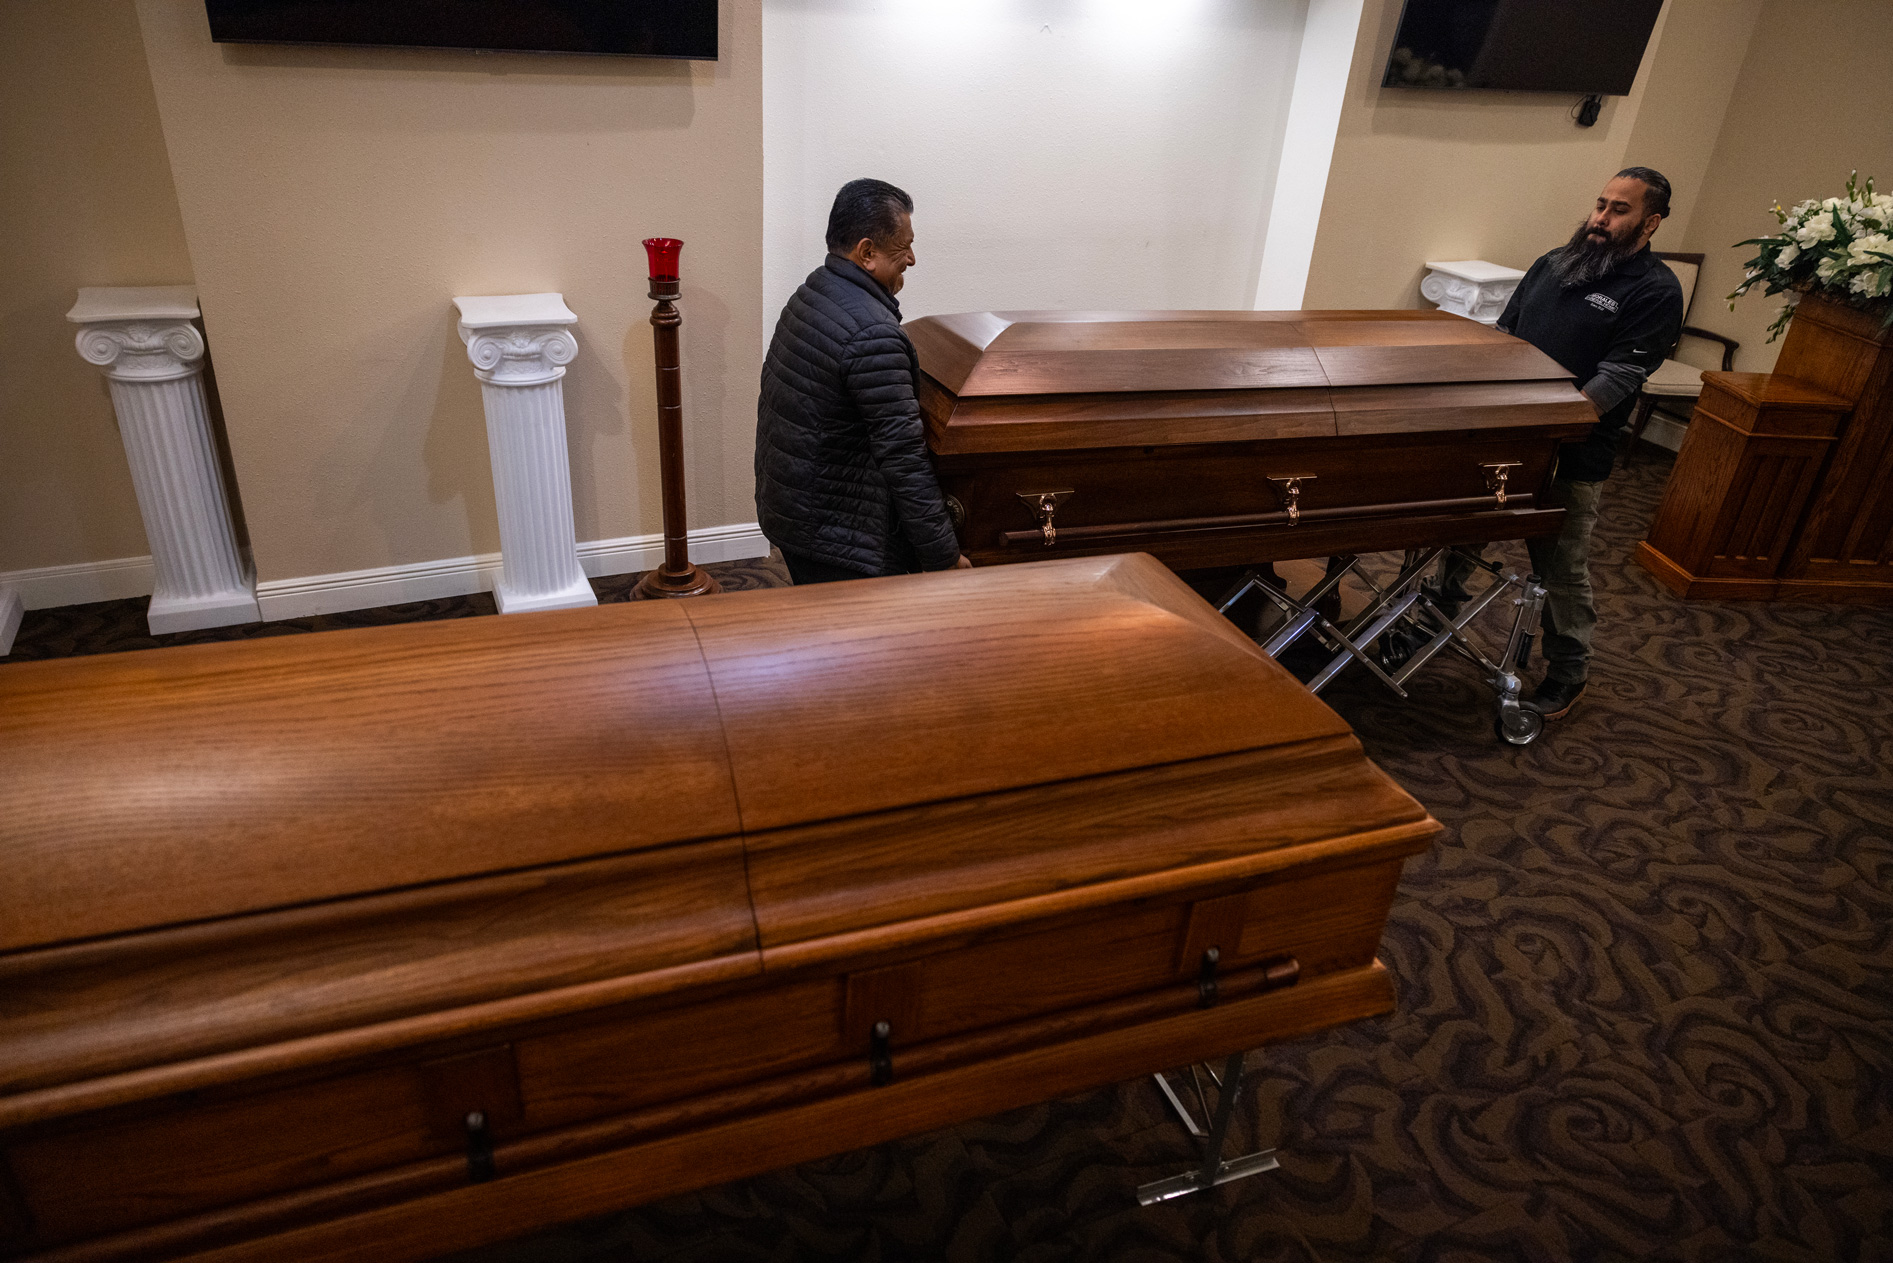 Cesar Sanchez, at left, and Chris Hernandez, at right, switch caskets for a viewing inside the main viewing room at Morales Funeral Home